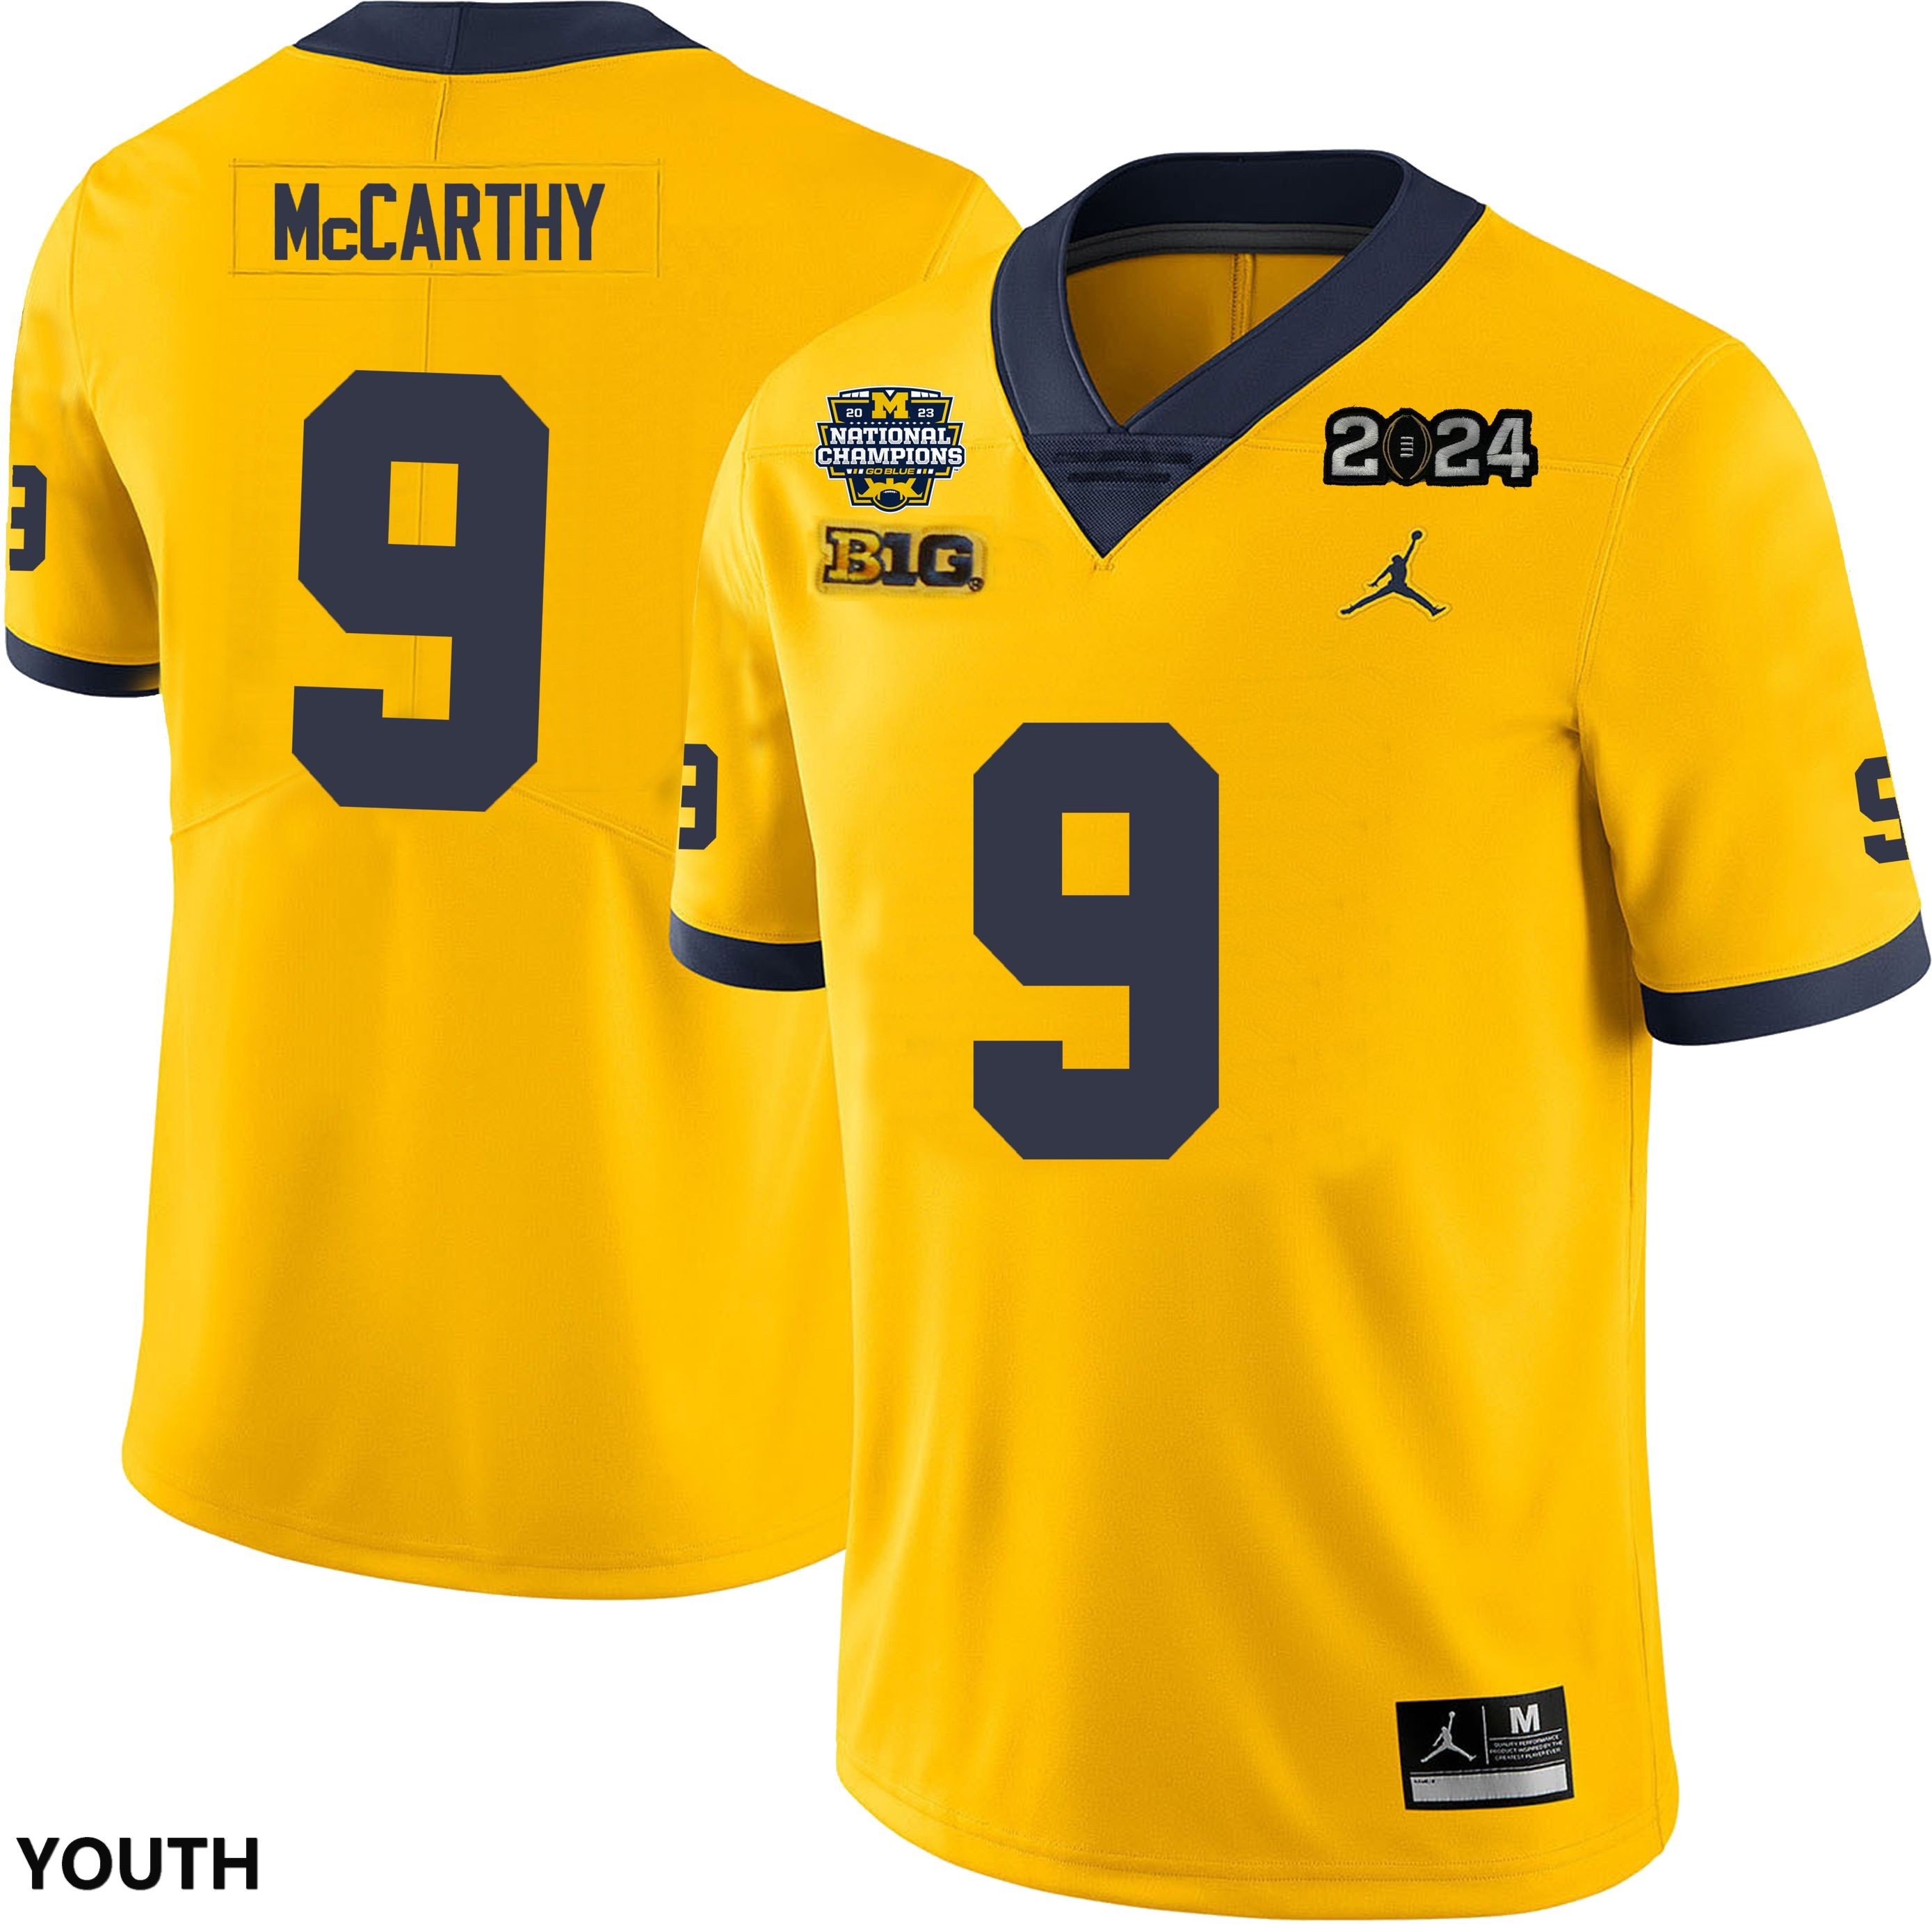 Youth NCAA Michigan Wolverines J.J. McCarthy #9 Maize National Champions Stitched College Football Jersey AN256Q5RK